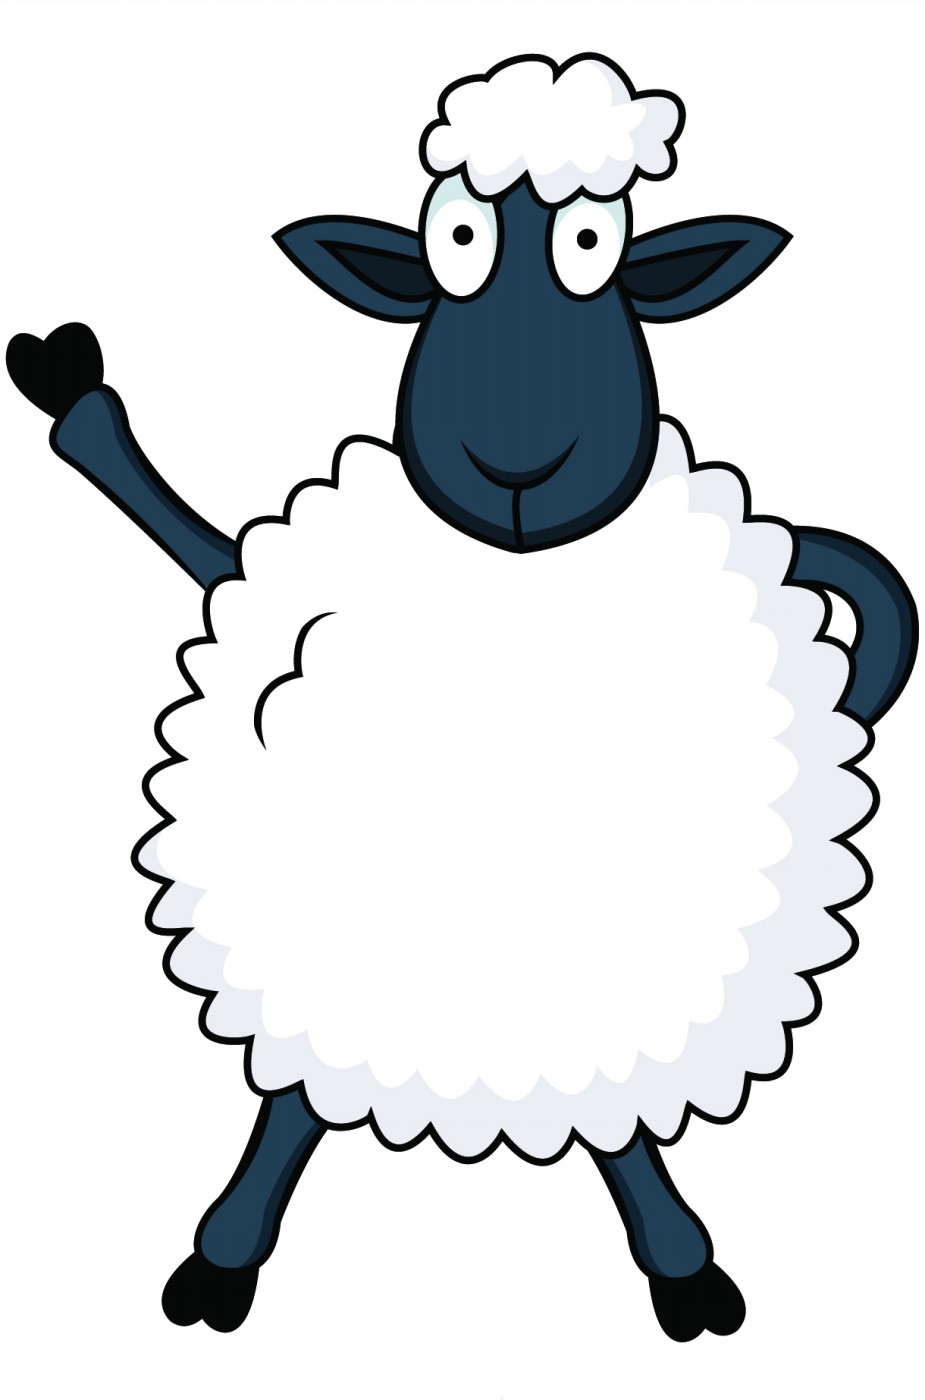 Free Cartoon Sheep Images, Download Free Clip Art, Free Clip.